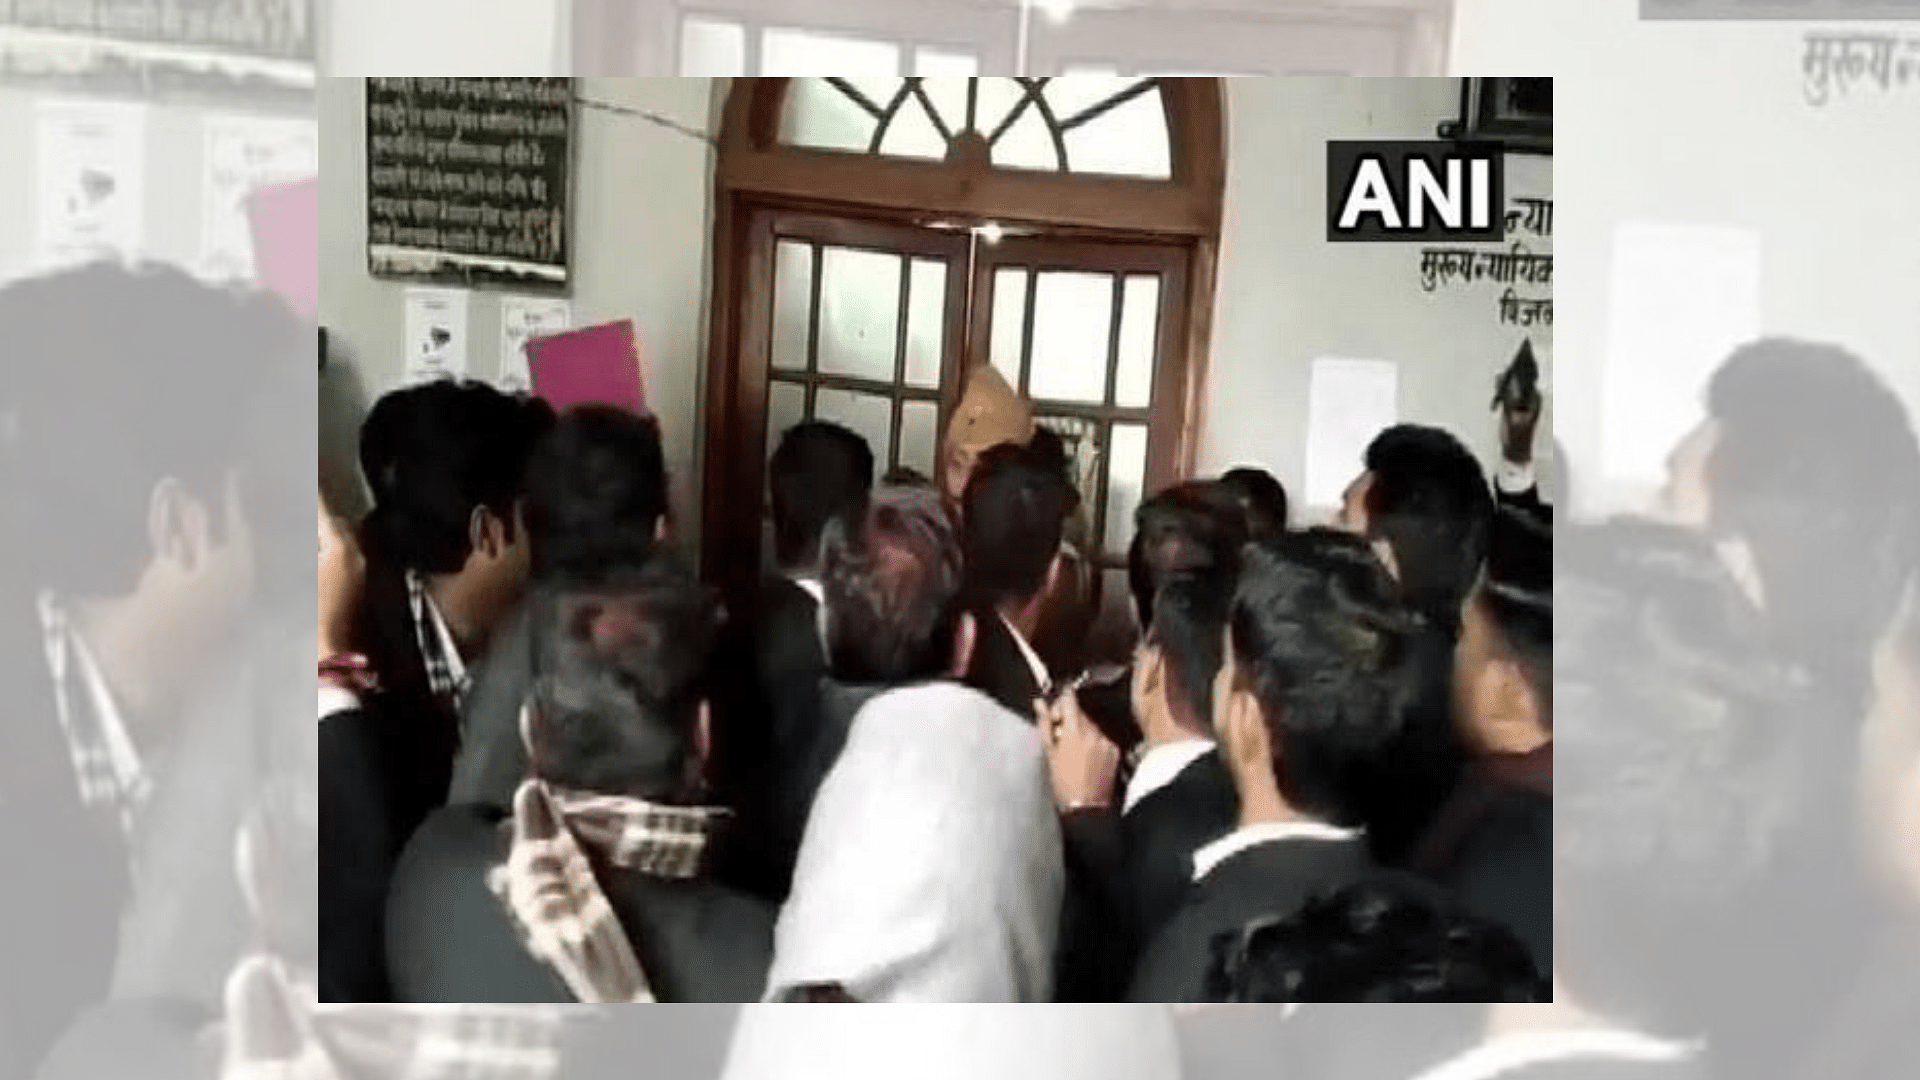 A gangster accused of killing a BSP functionary was shot inside Uttar Pradesh’s Bijnor courtroom.